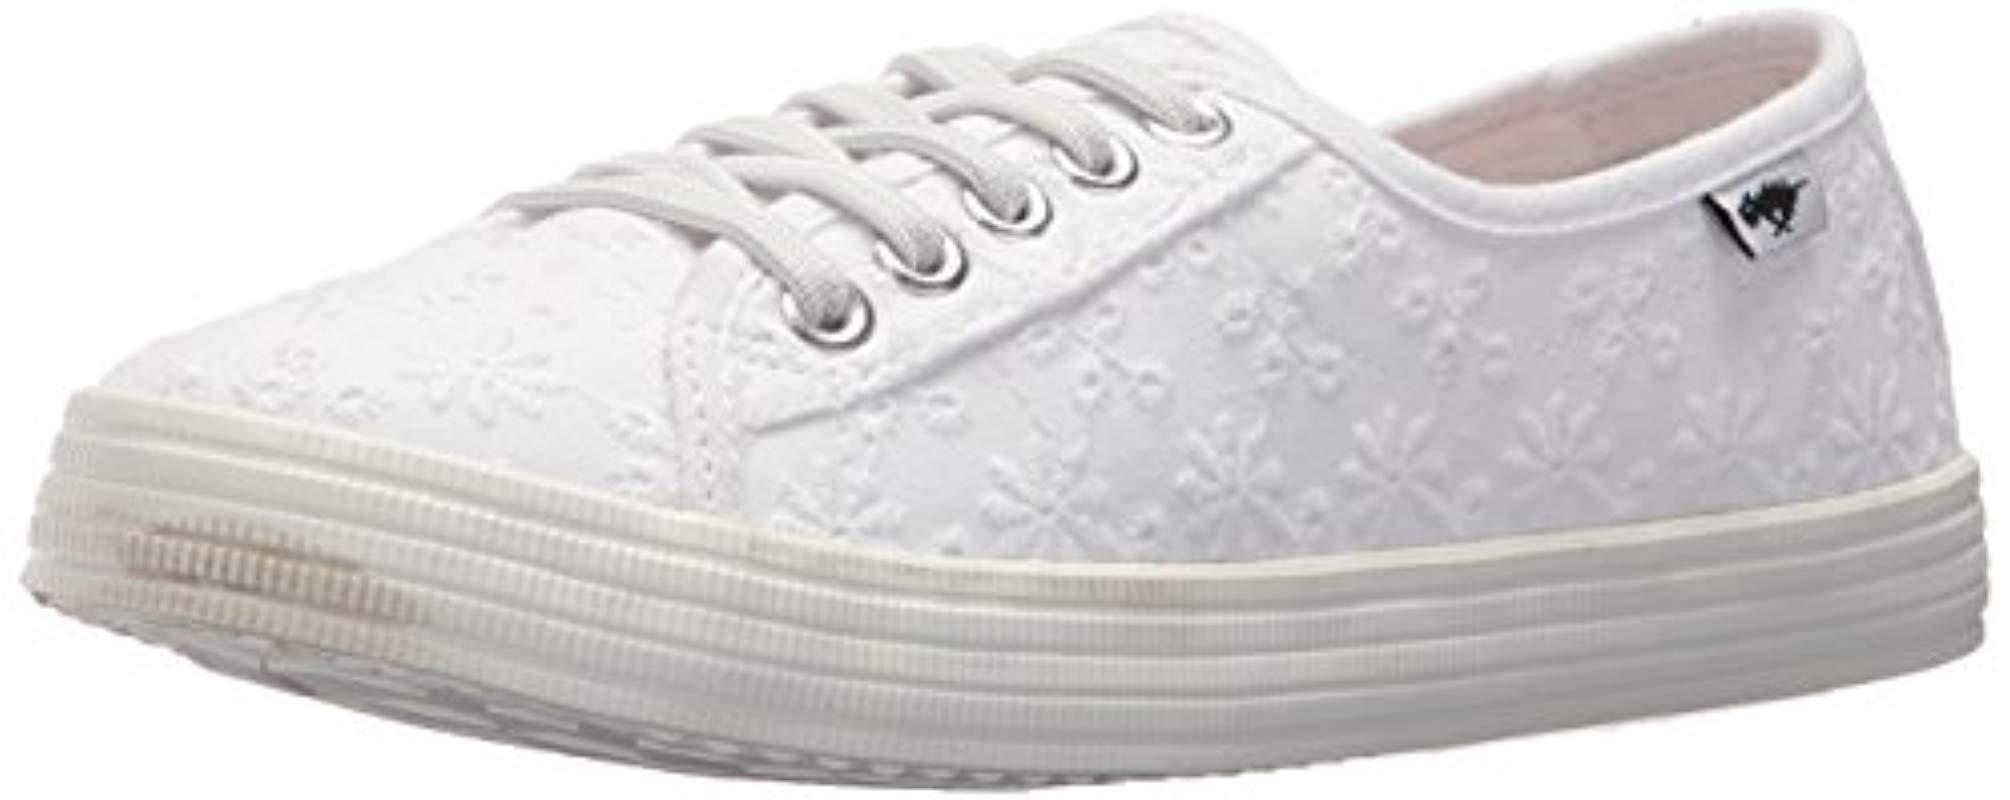 Emigrere Indsigt radikal Rocket Dog Chowchow Lucky Eyelet Cotton Sneaker in White | Lyst